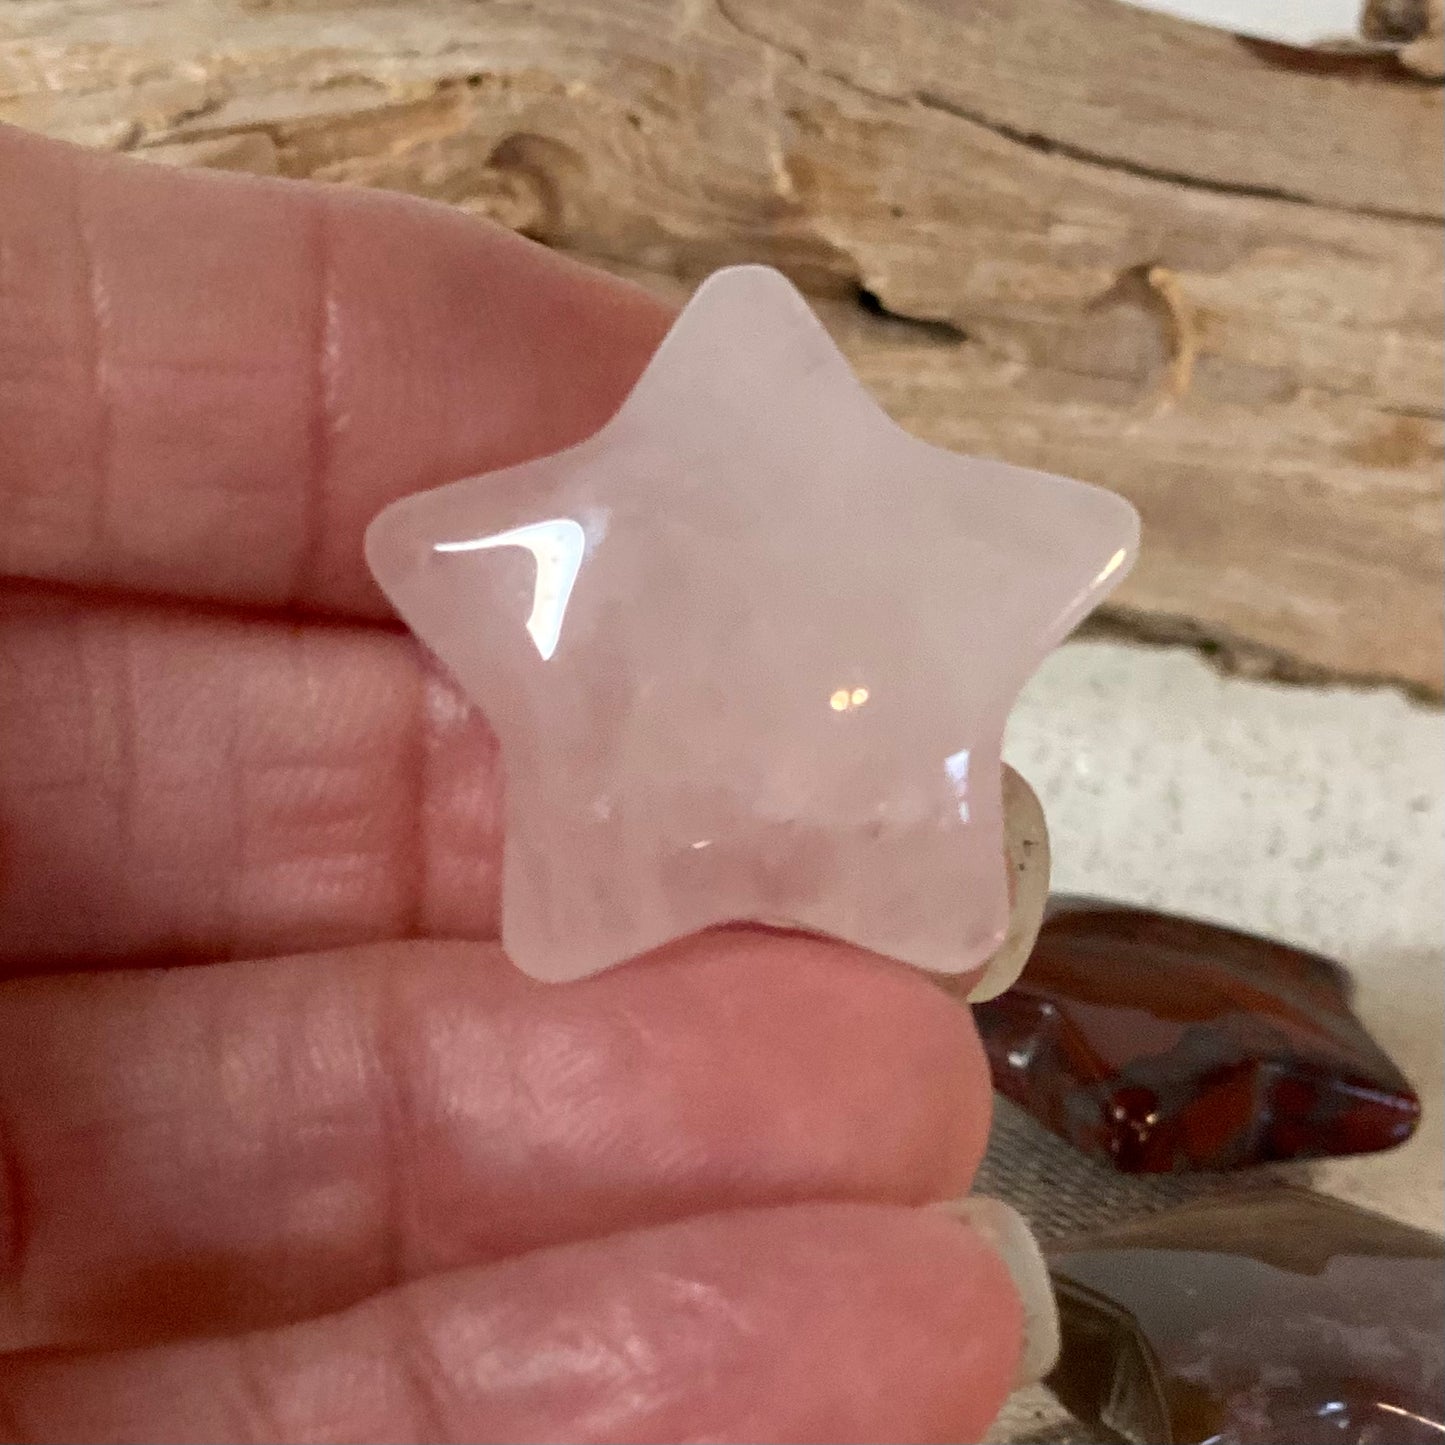 Mini Crystal Stars: Celestial Wonders in Your Hands